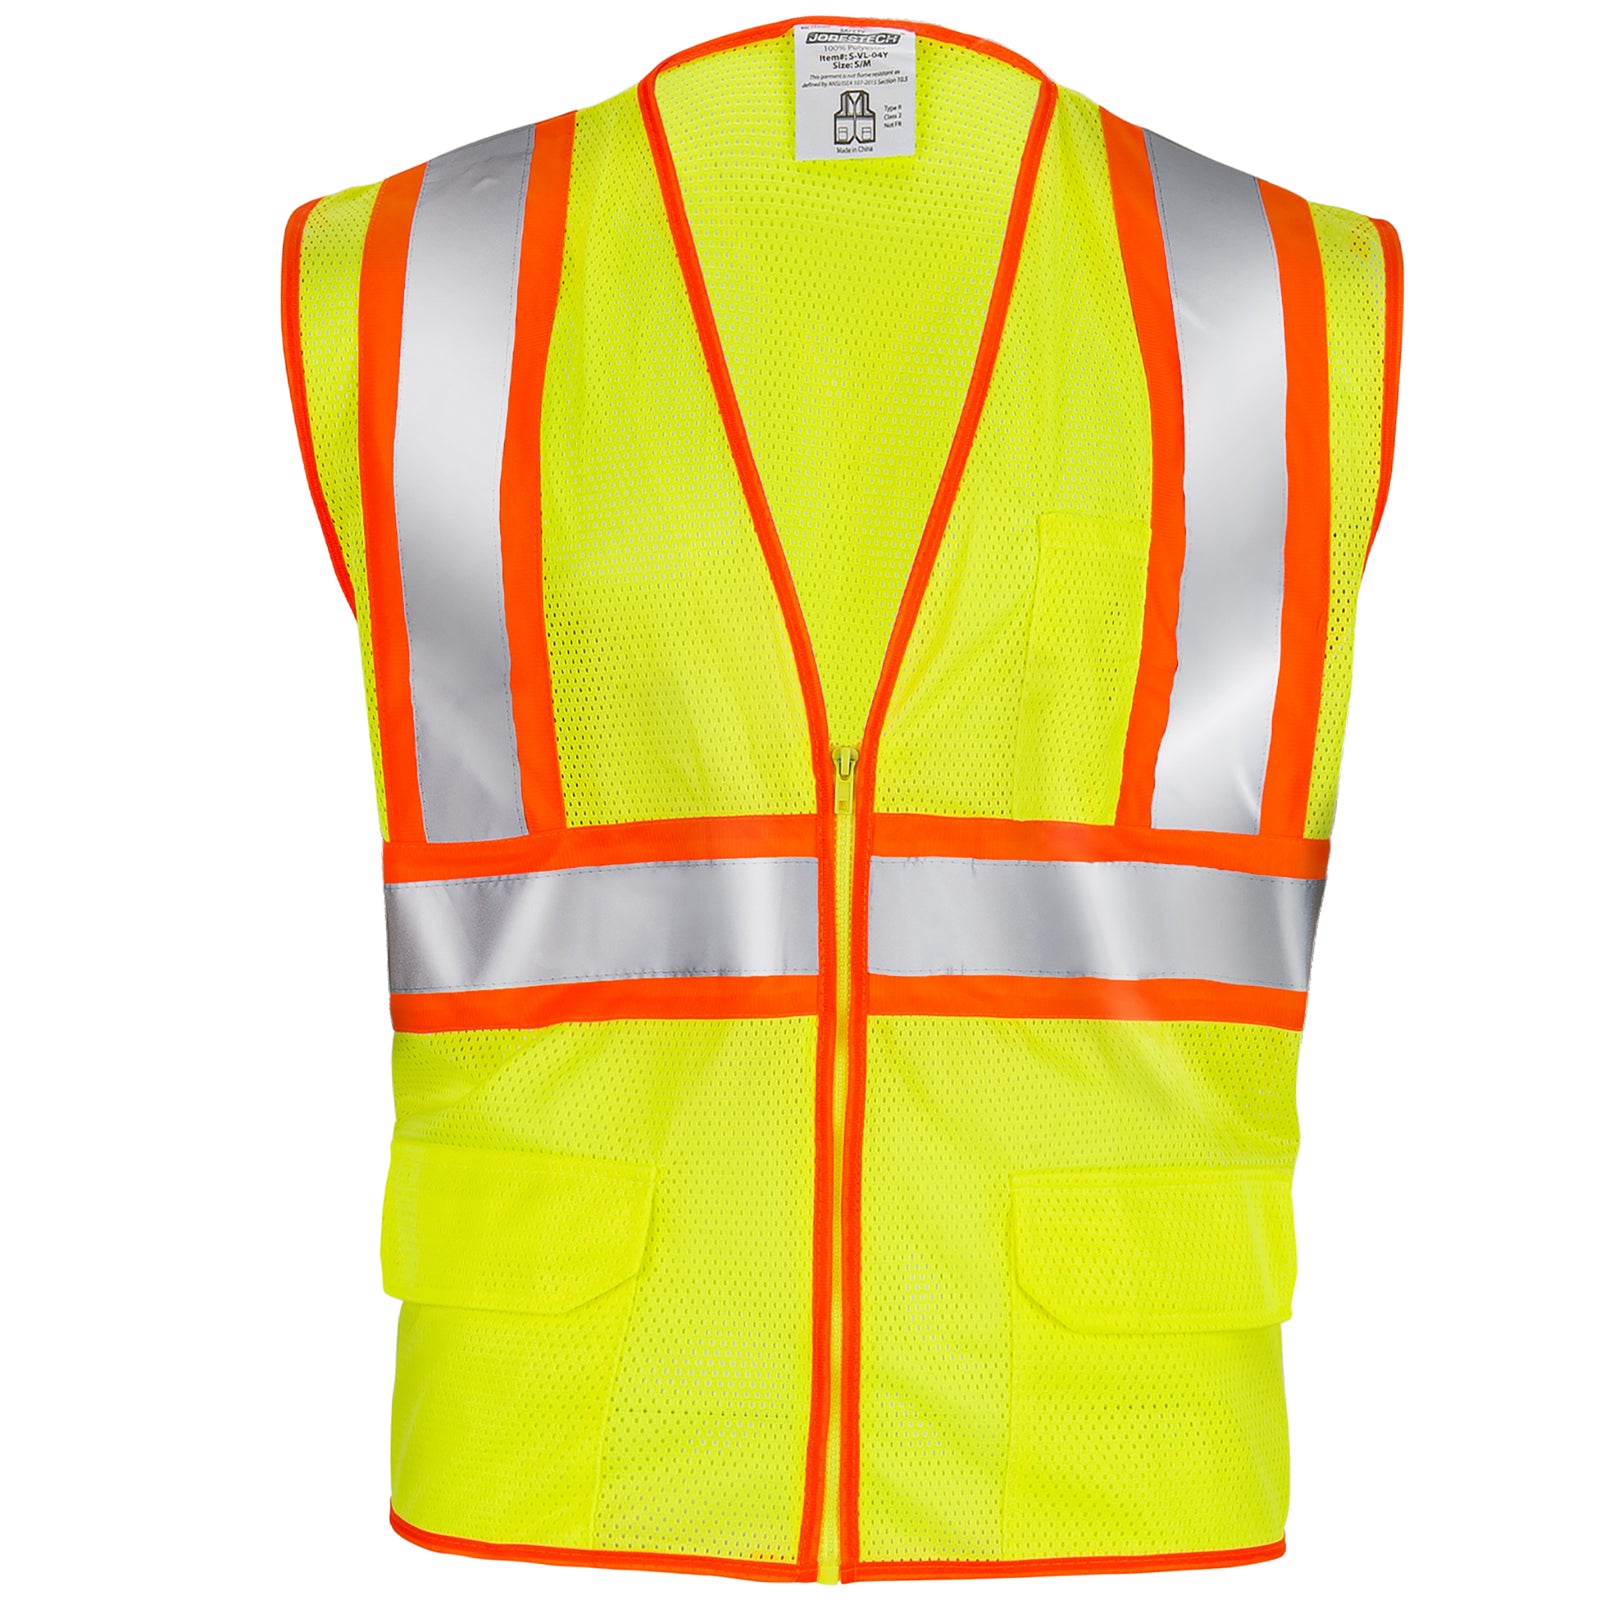 The high visibility ANSI/ISEA 107-2015, Type R Class 2 safety vest